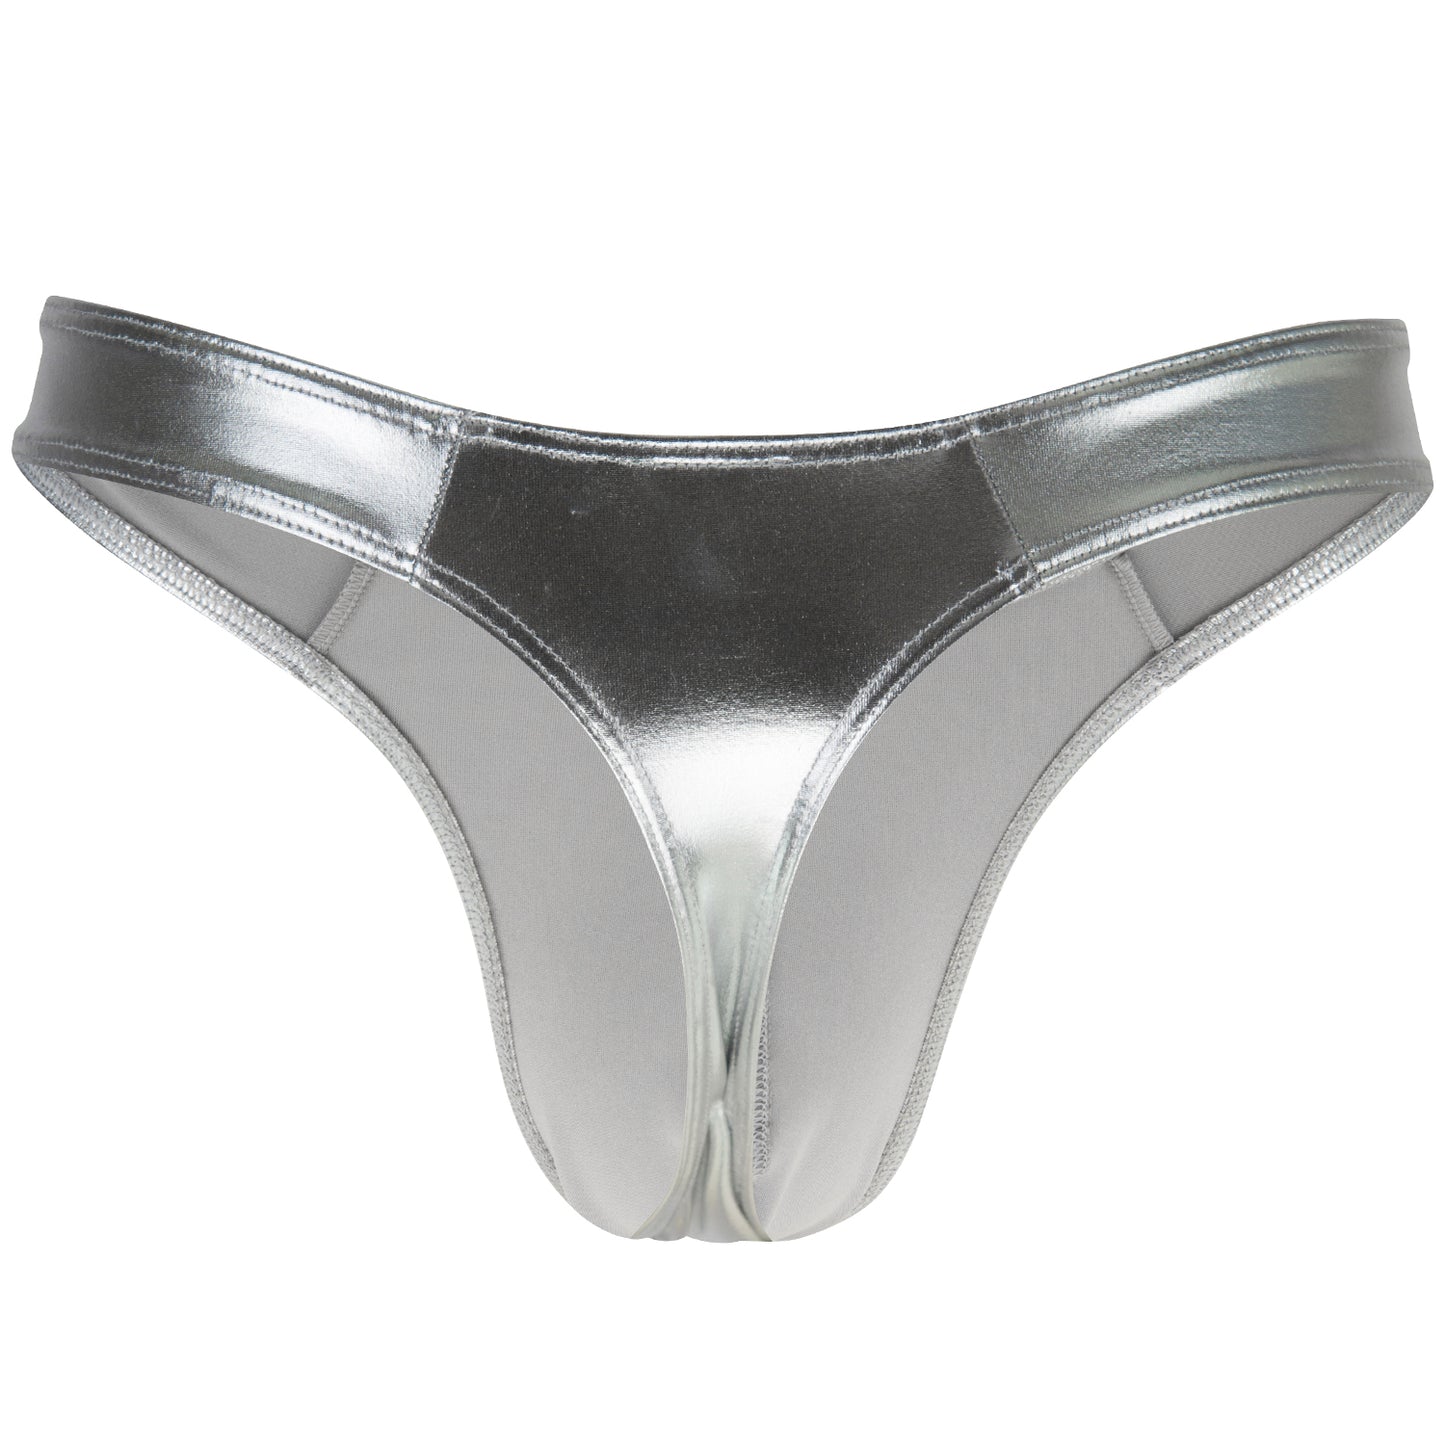 MEN'S STRING SILVER METALLIC SHINY LEATHER LOOK